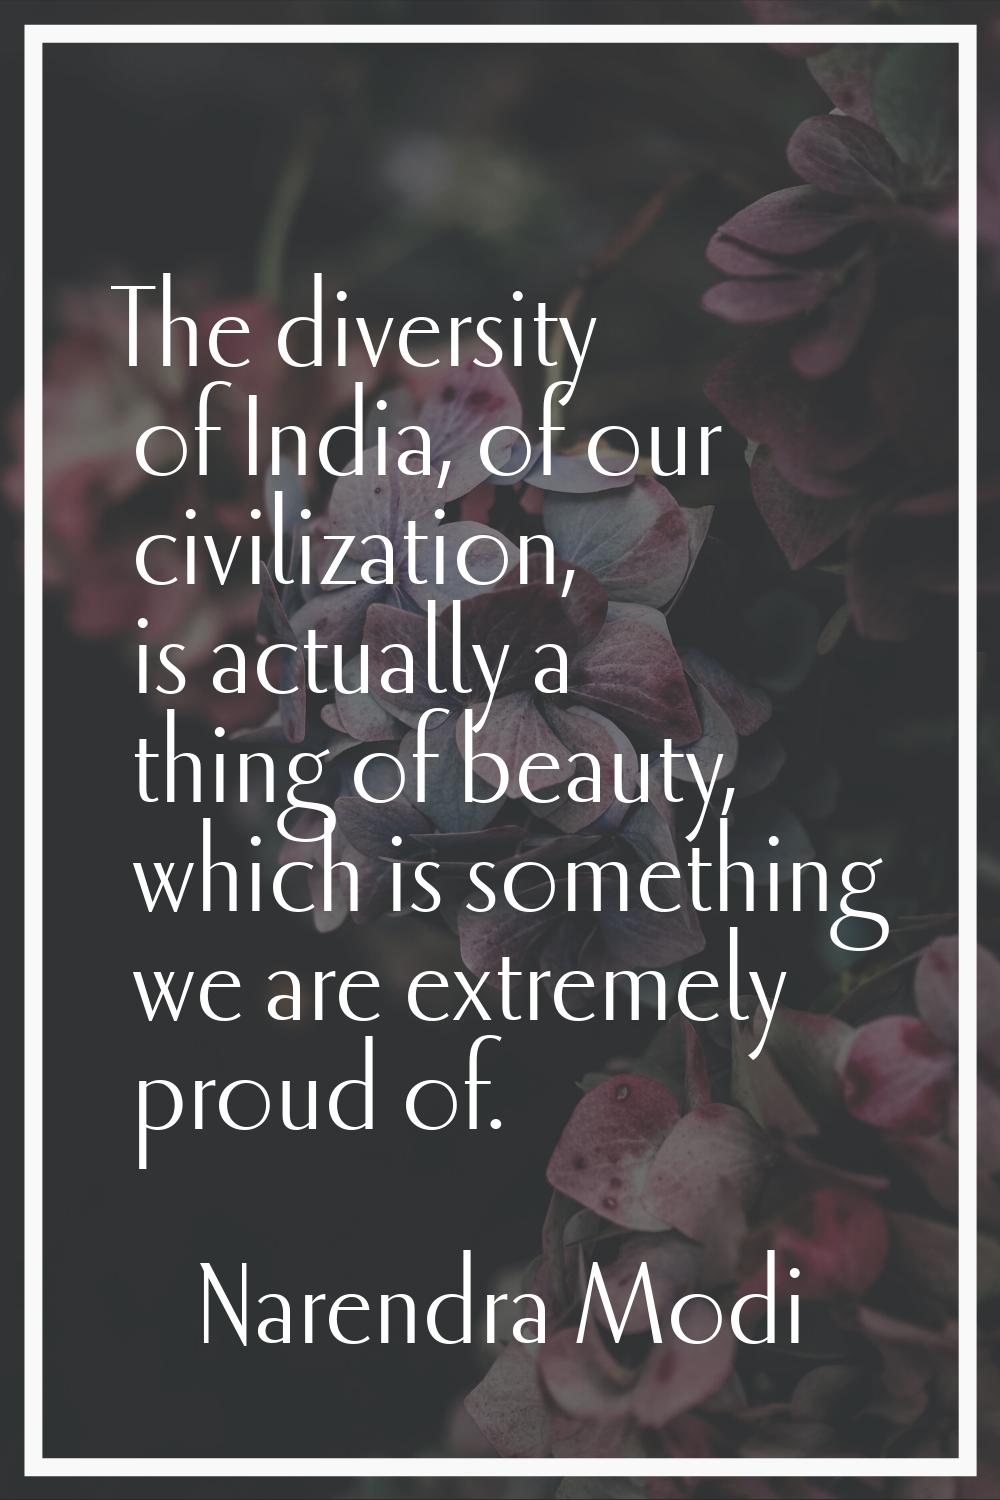 The diversity of India, of our civilization, is actually a thing of beauty, which is something we a